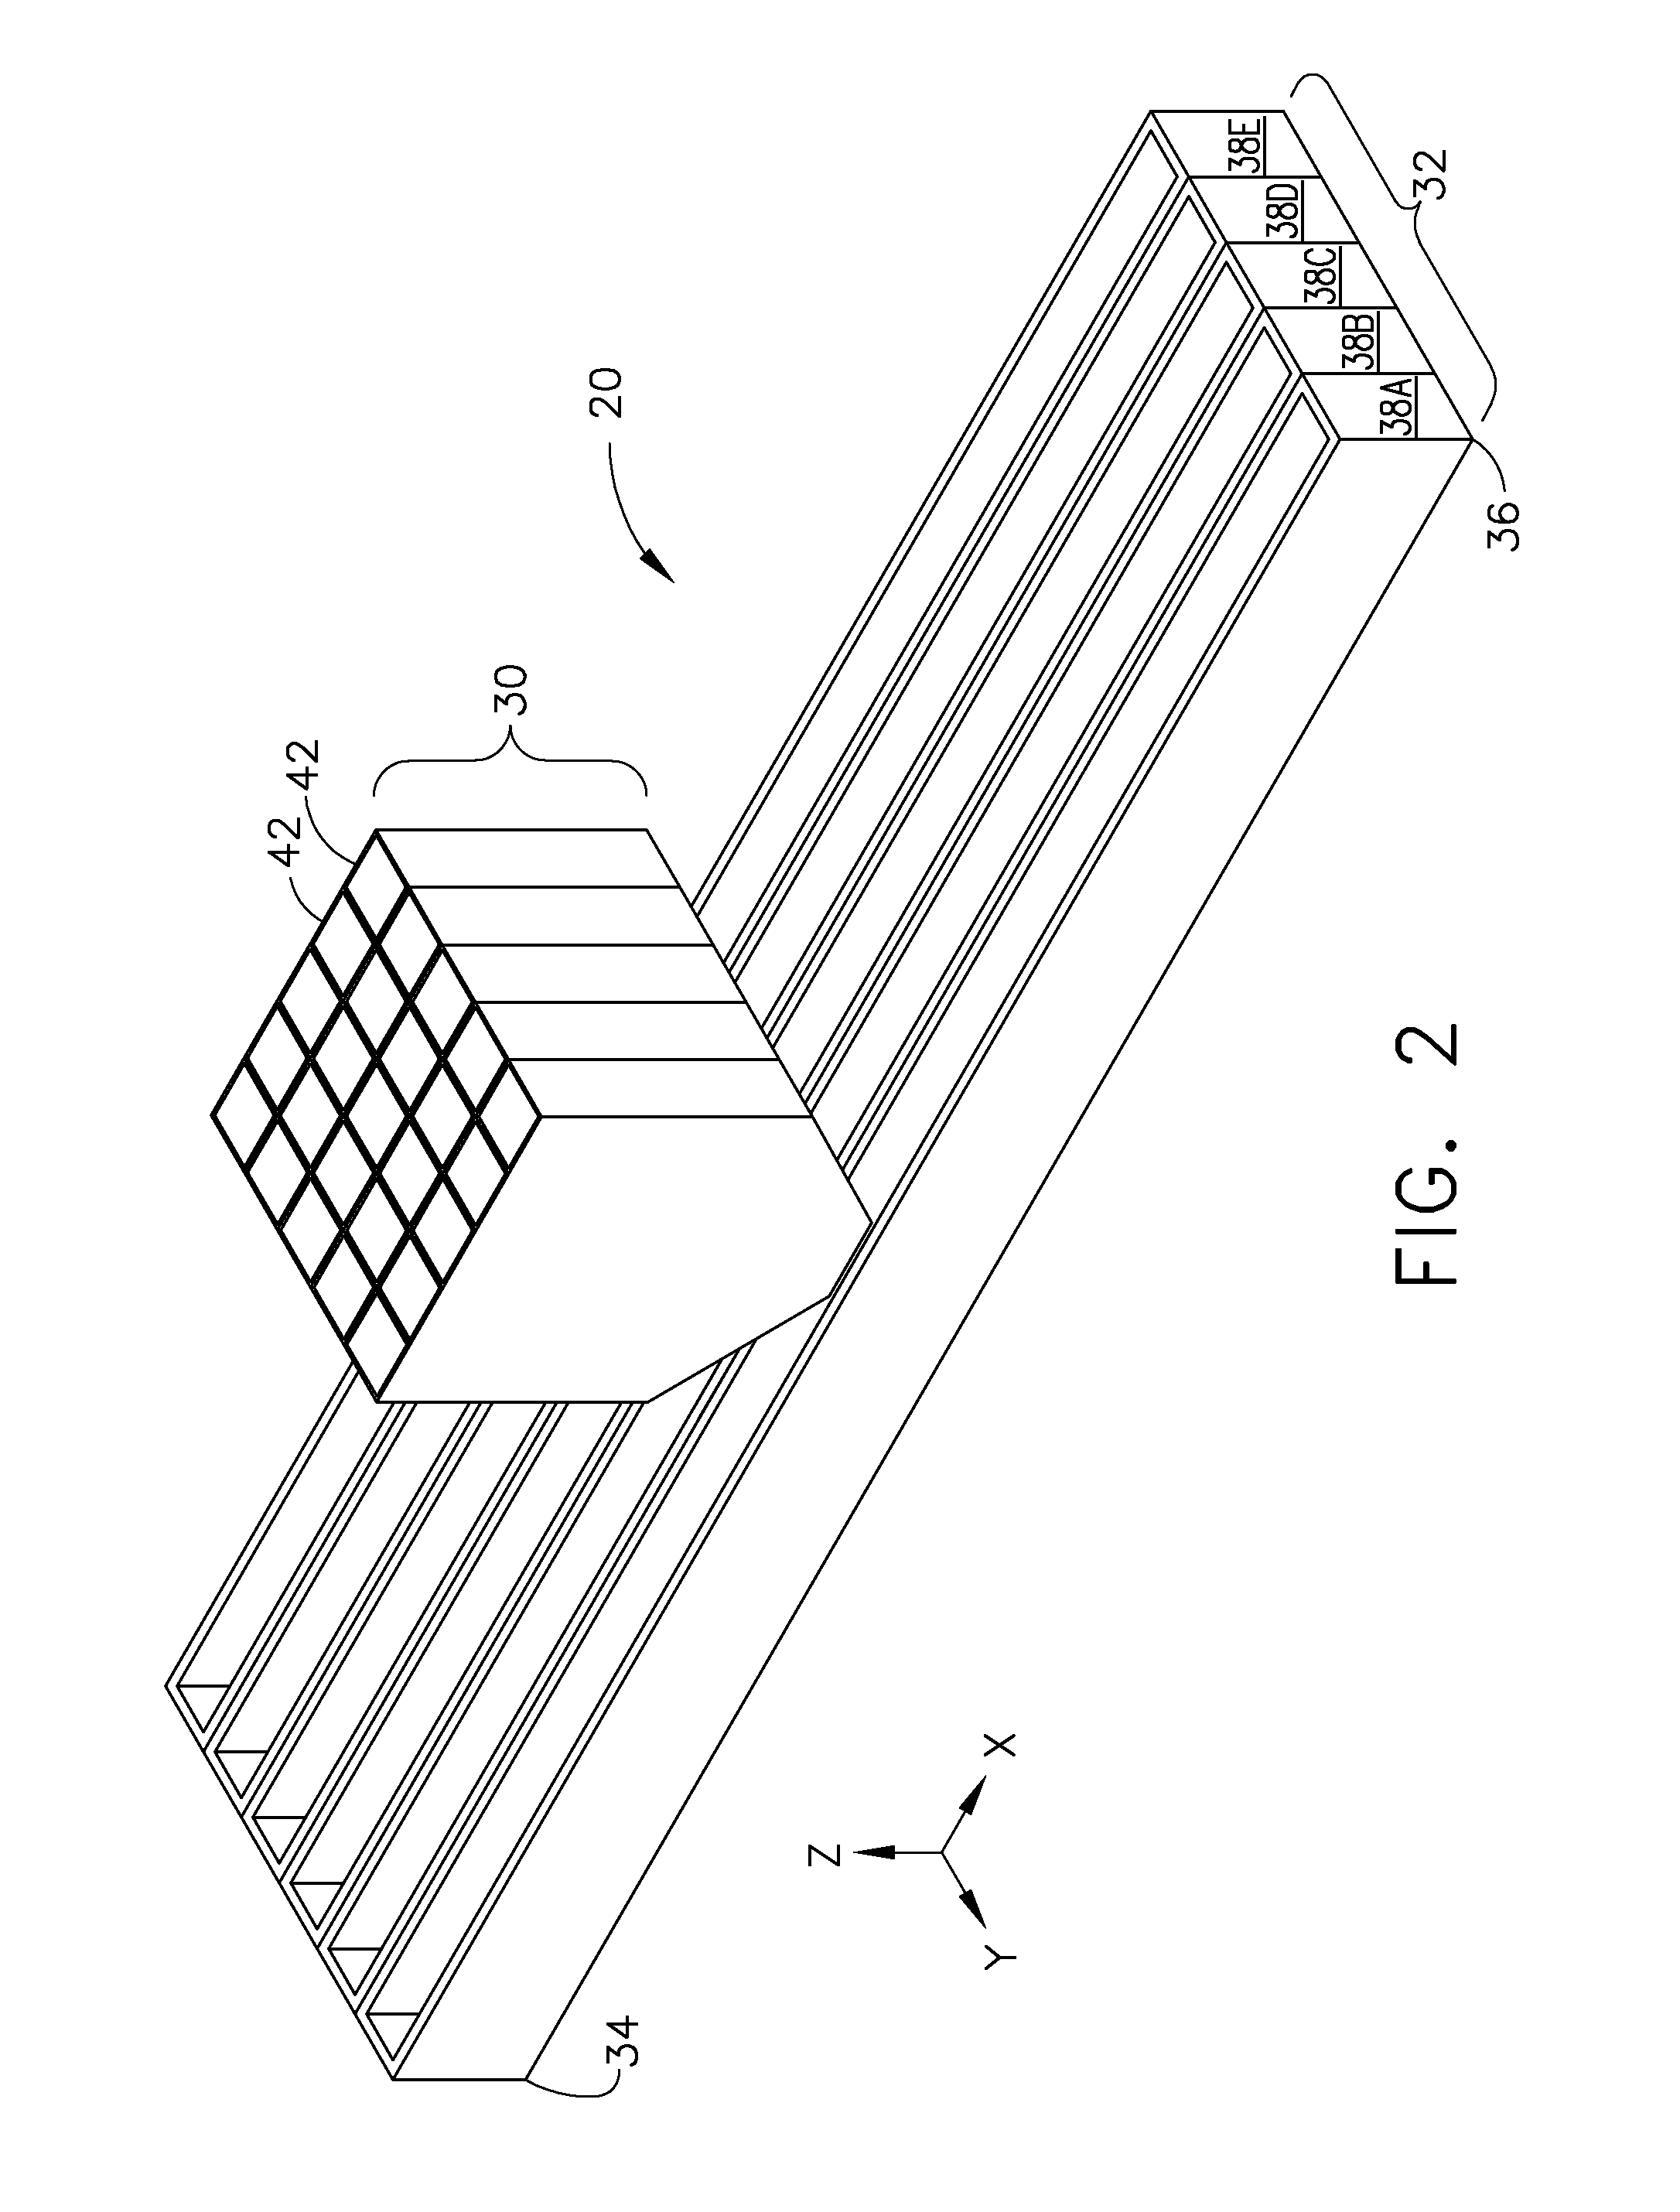 Coater apparatus and method for additive manufacturing